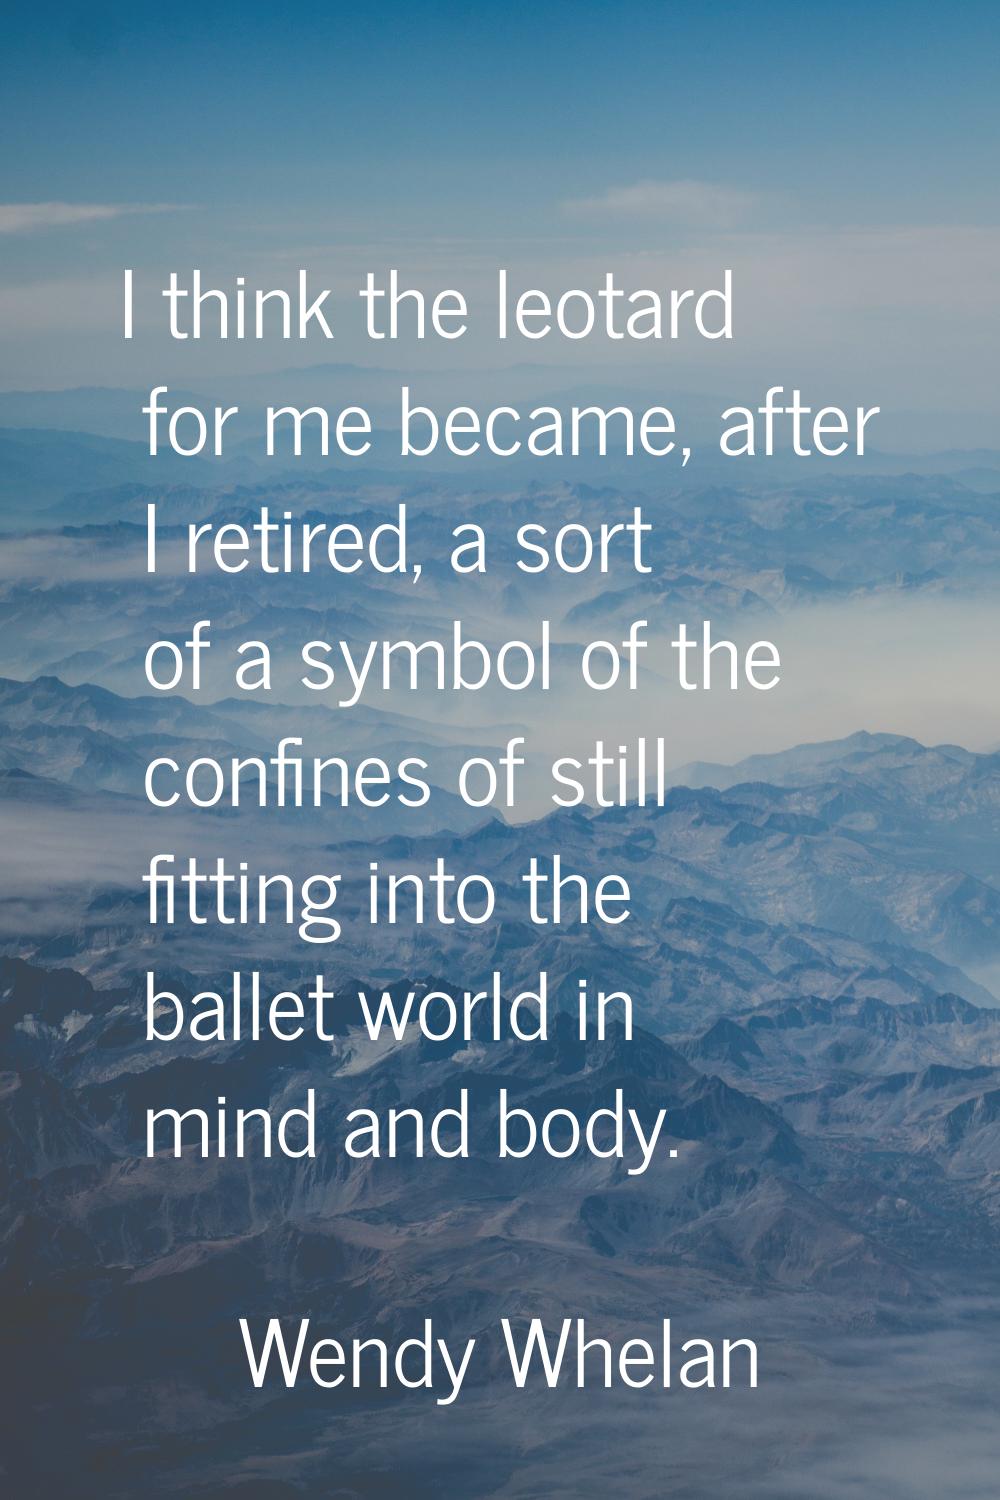 I think the leotard for me became, after I retired, a sort of a symbol of the confines of still fit